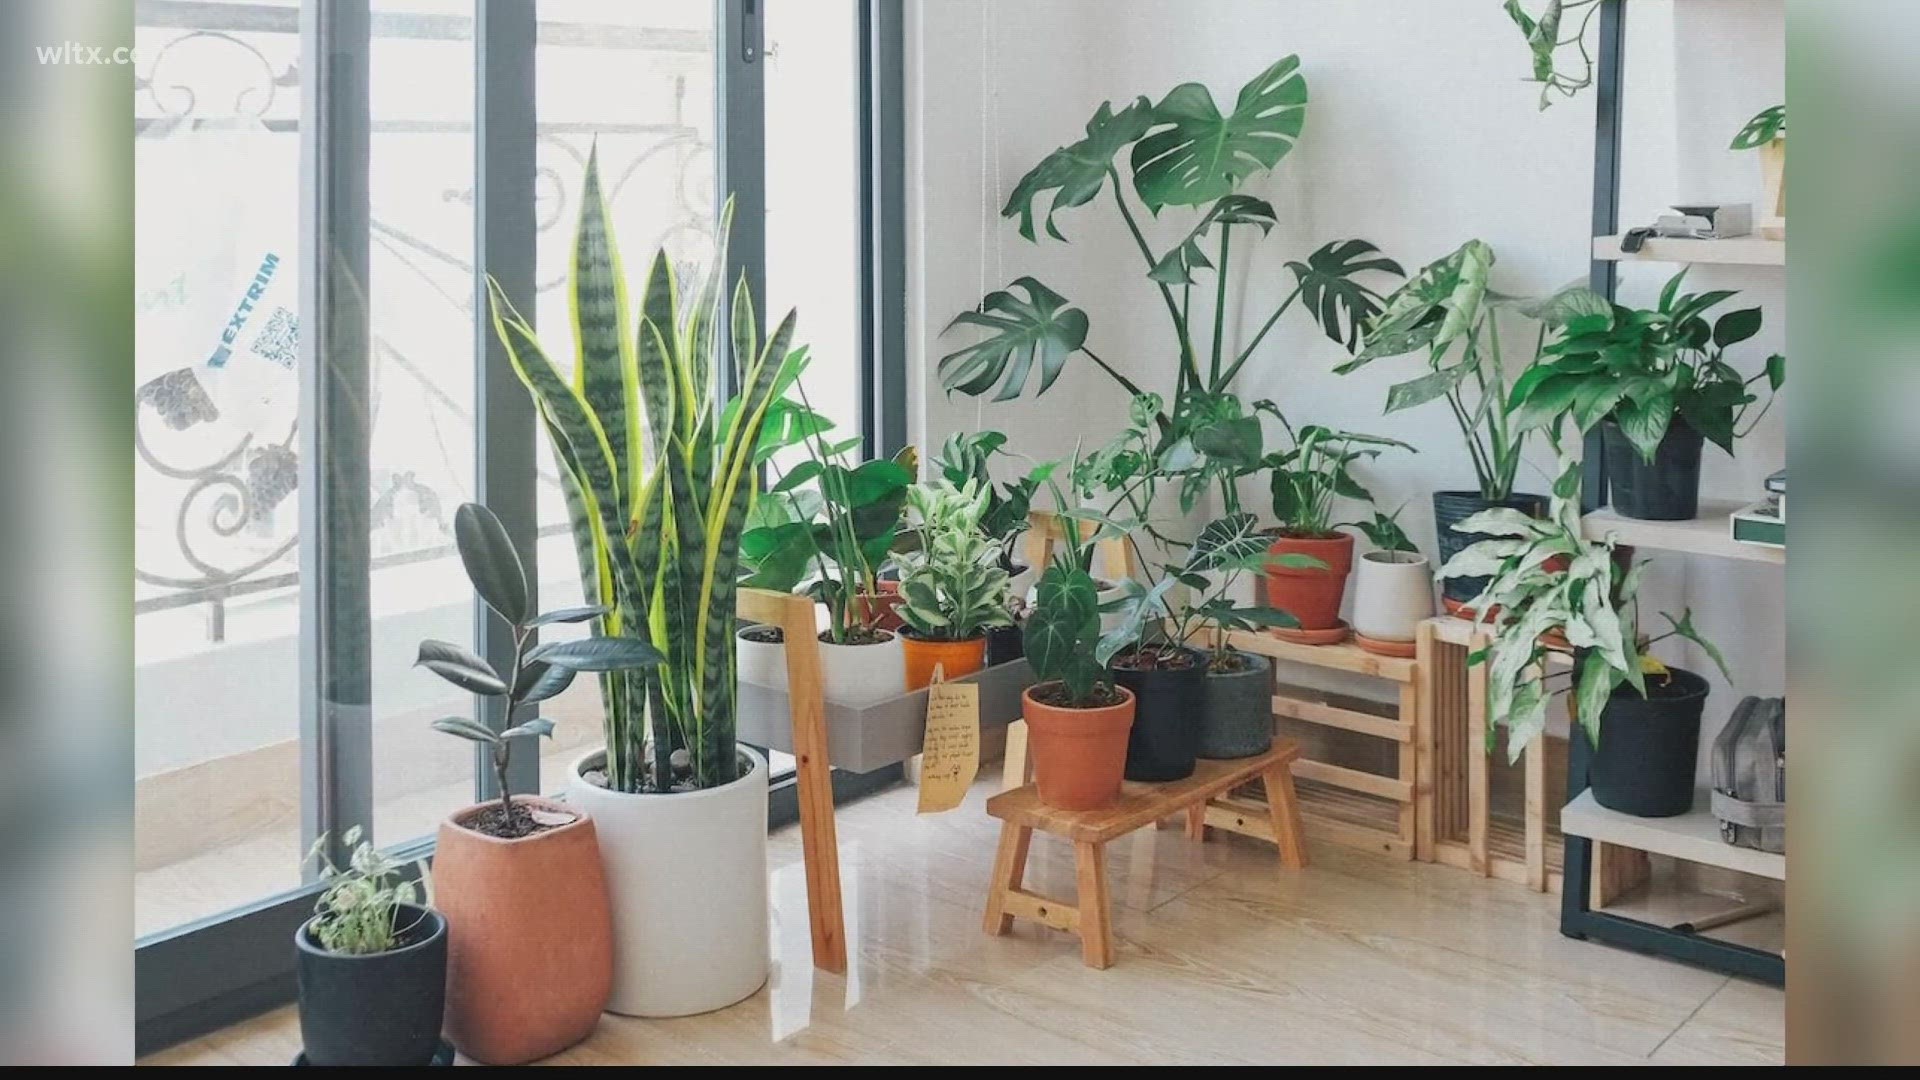 Spending time in nature can be refreshing and energizing, but did you know that bringing a piece of nature indoors can improve the air you breathe?